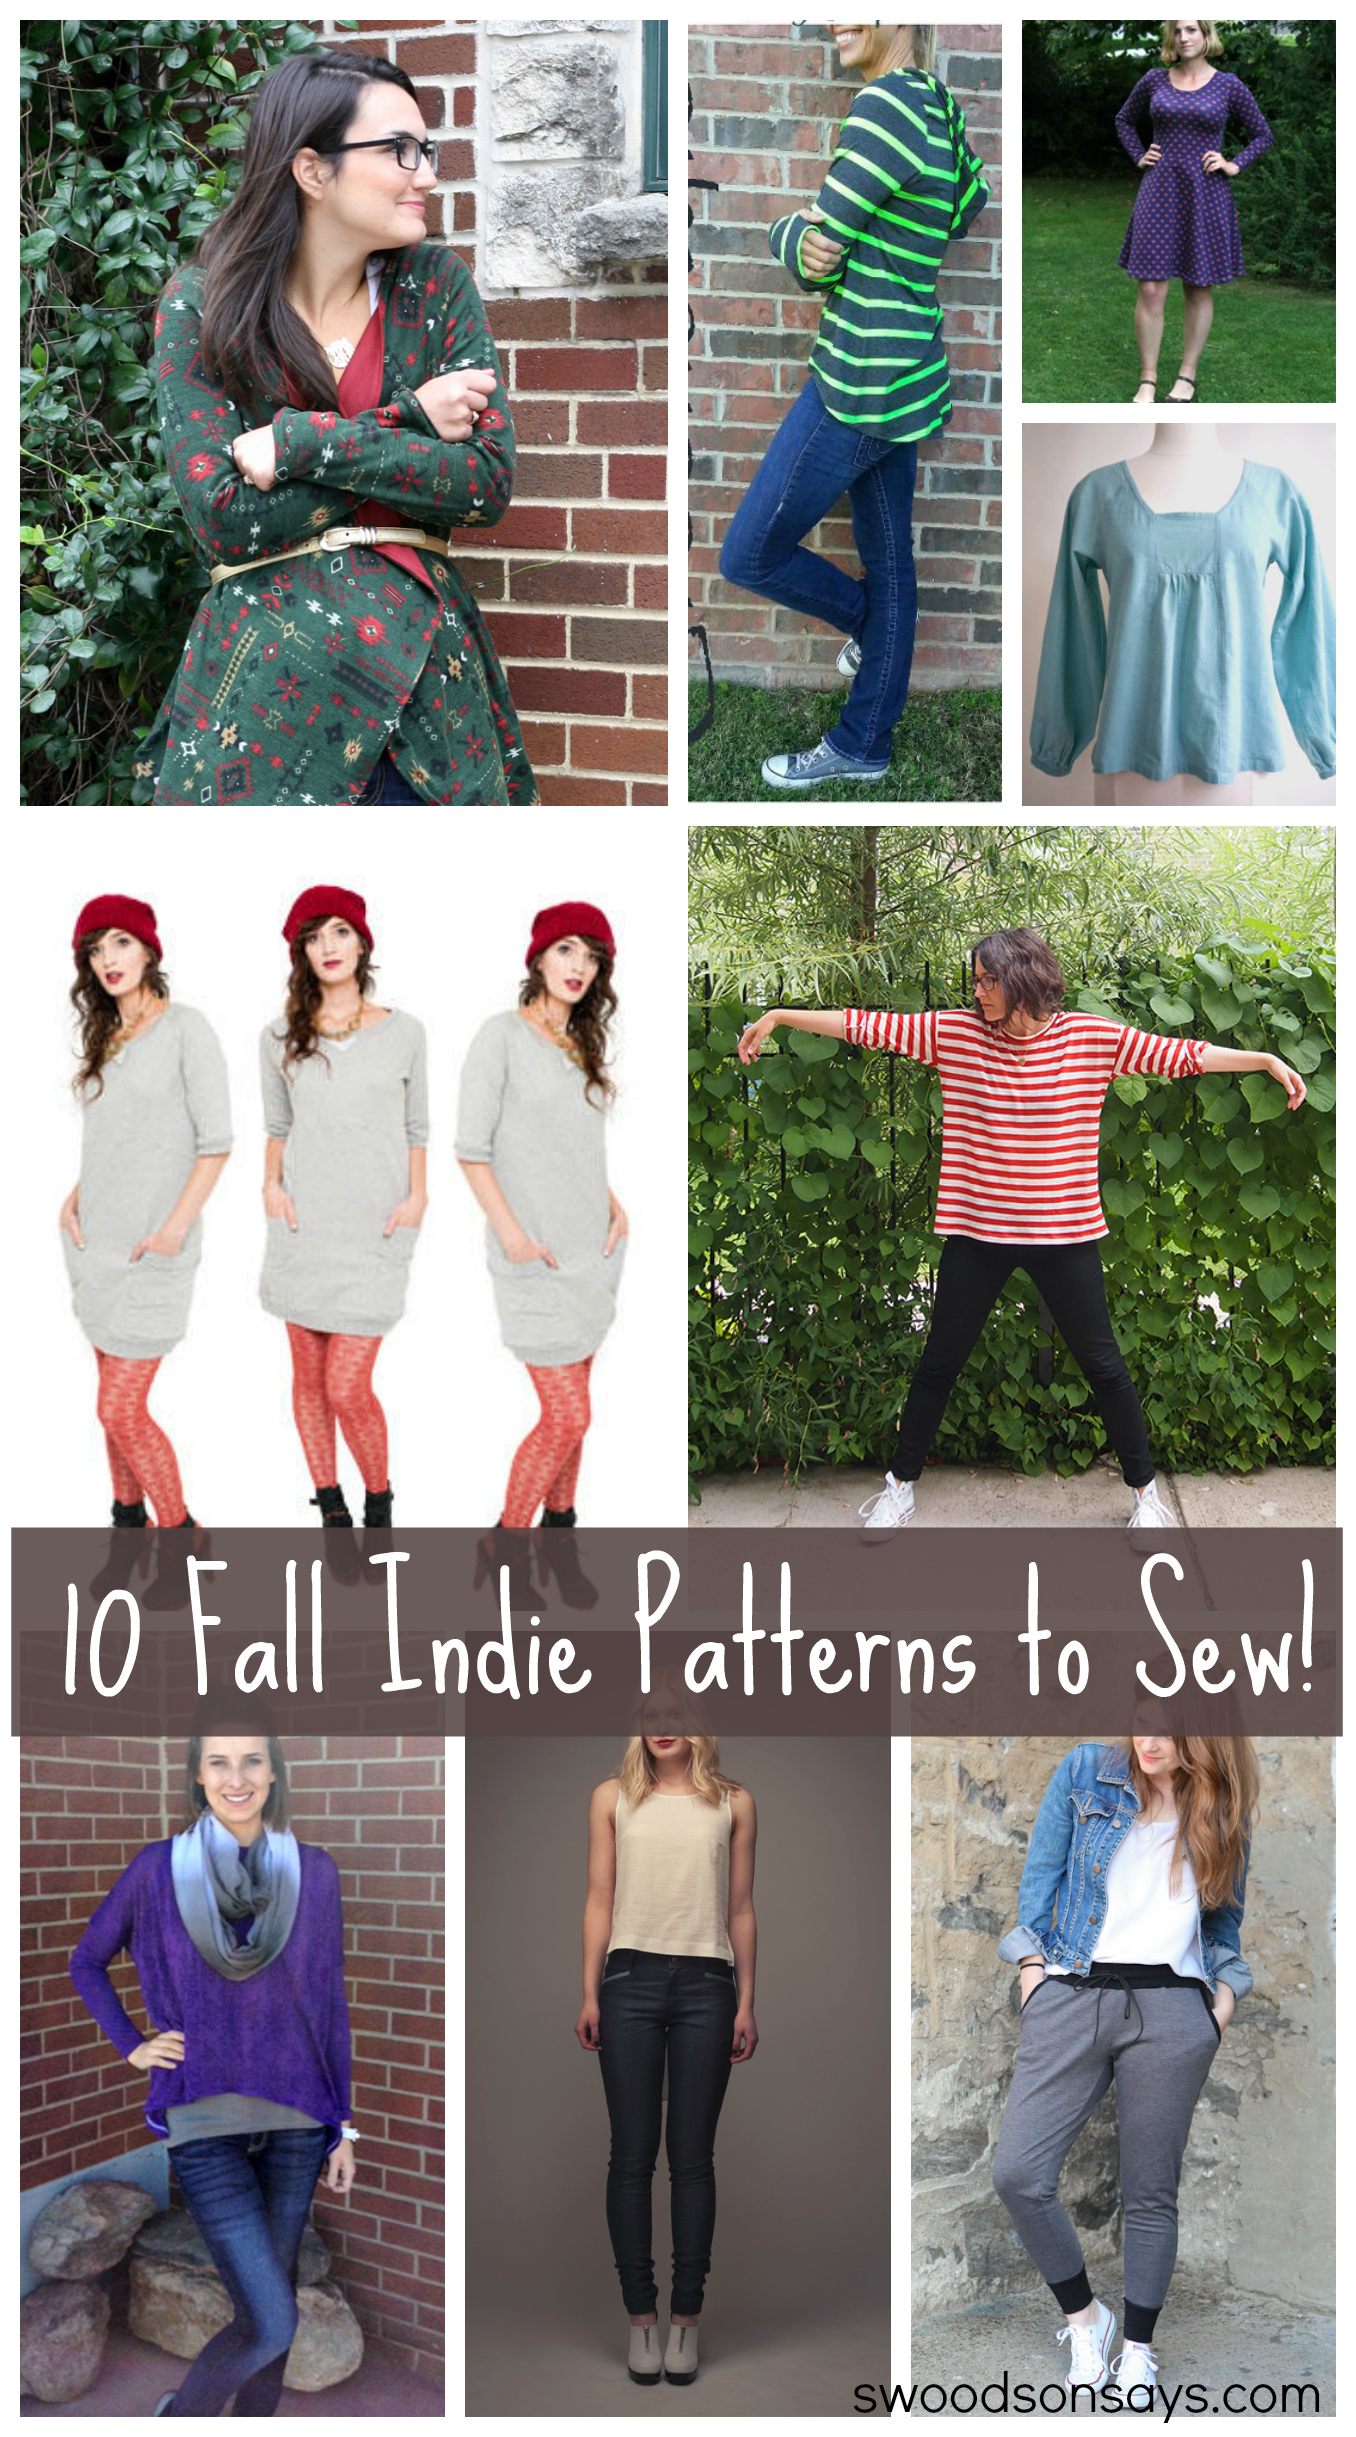 10 Indie Patterns to Sew for Fall